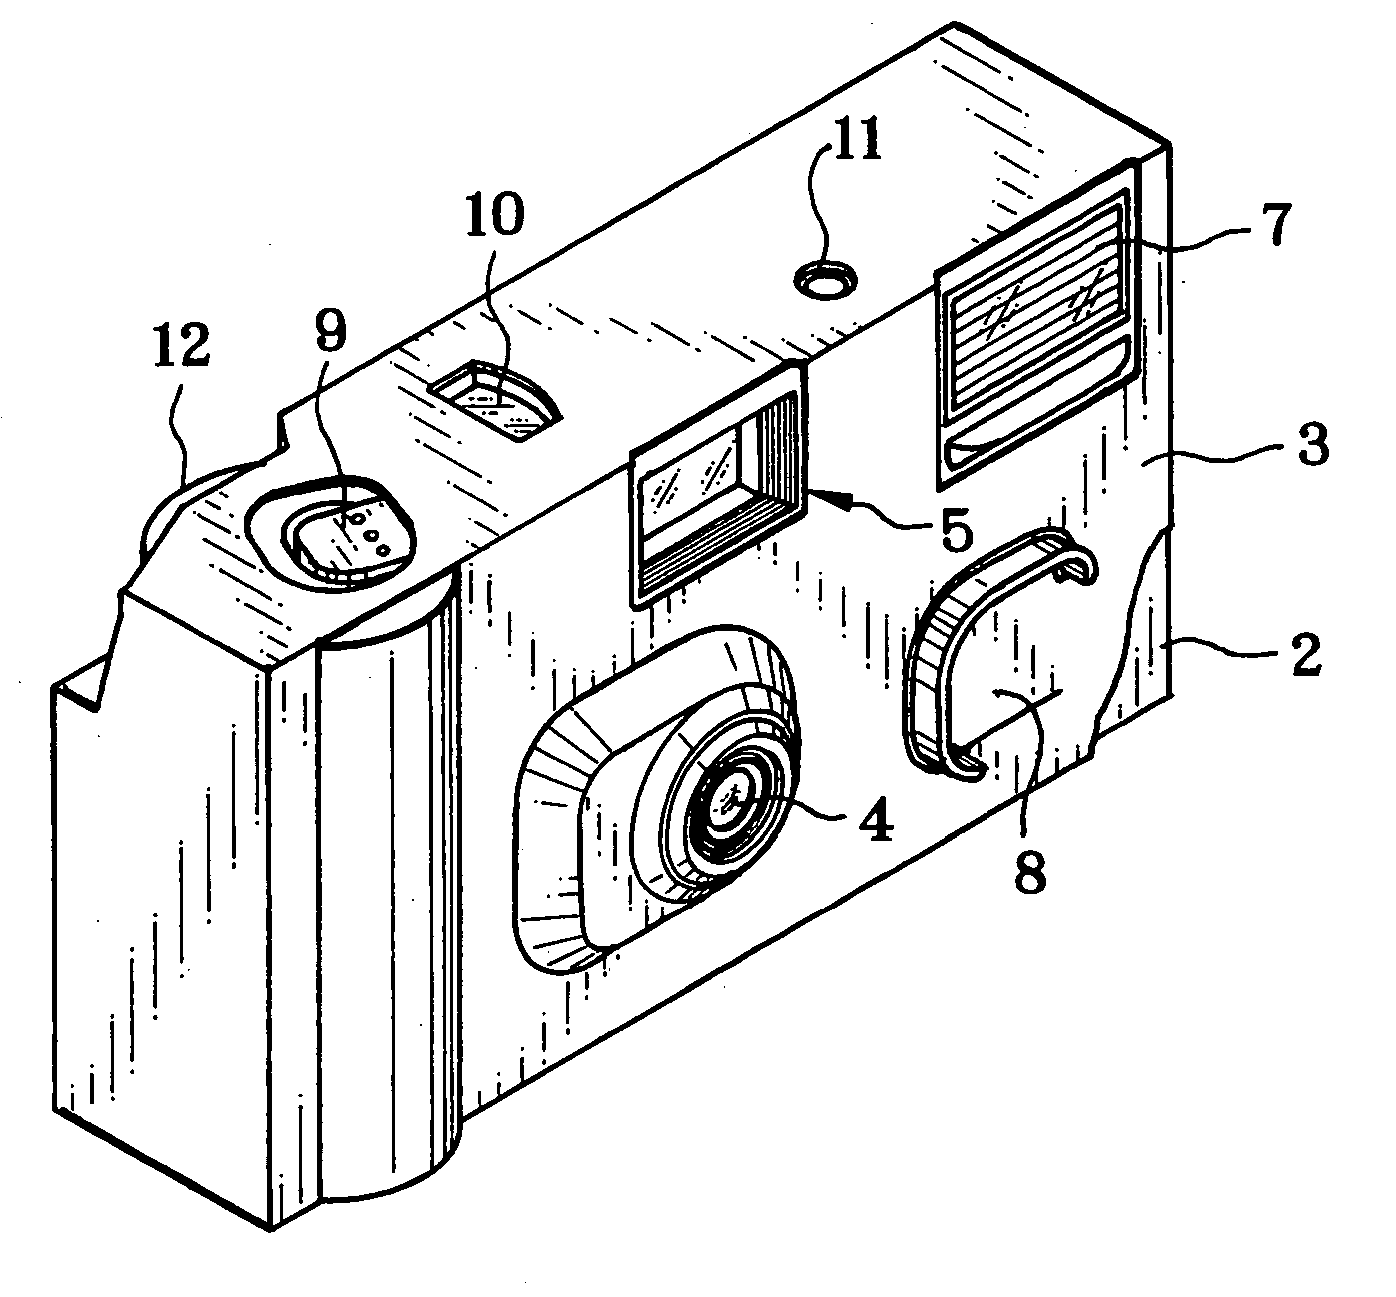 Lens-fitted photo film unit and cassette for photo film